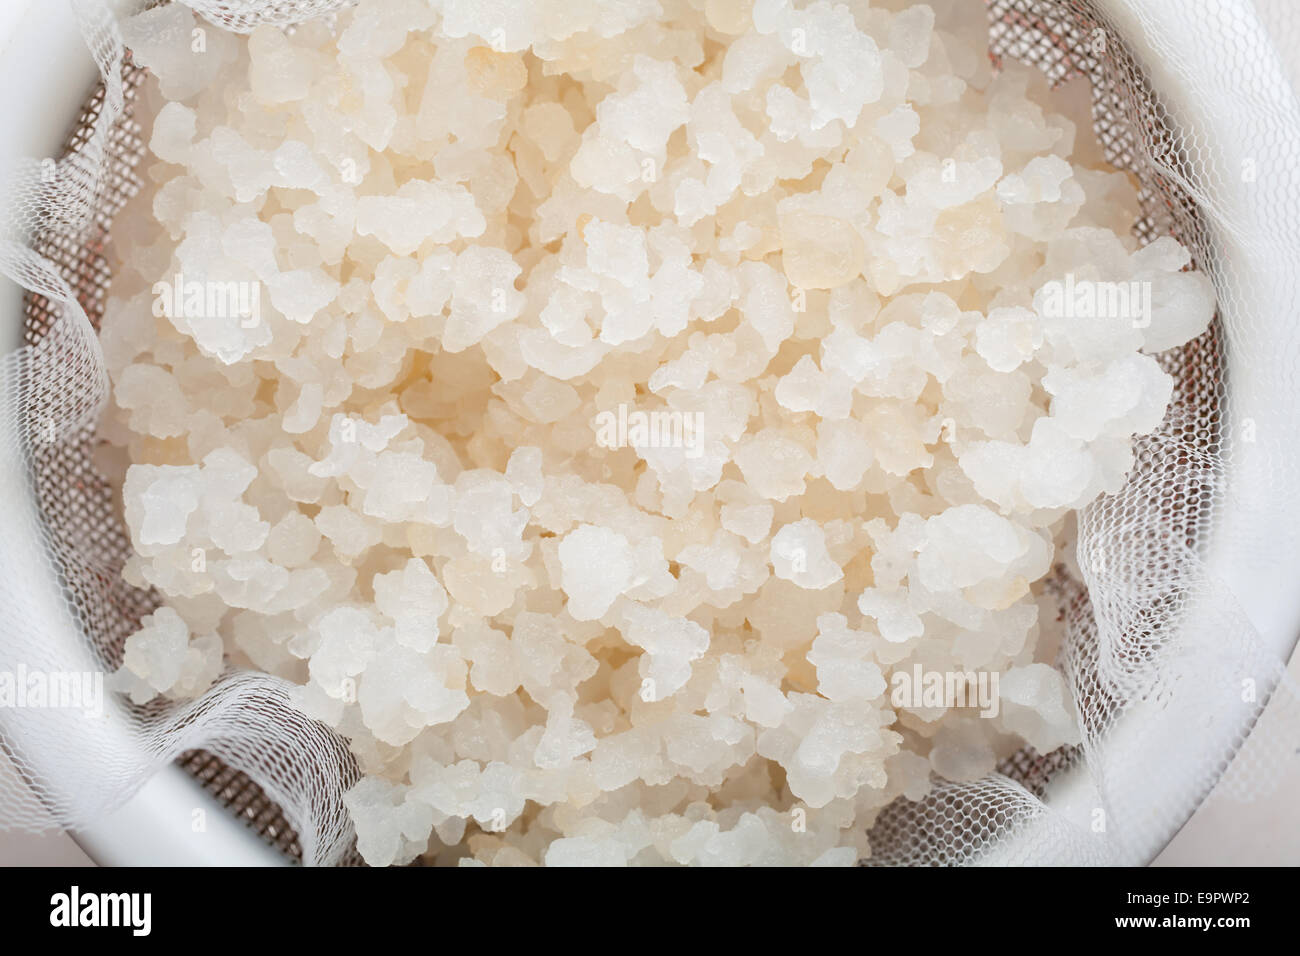 Water kefir grains into a plastic strainer Stock Photo - Alamy